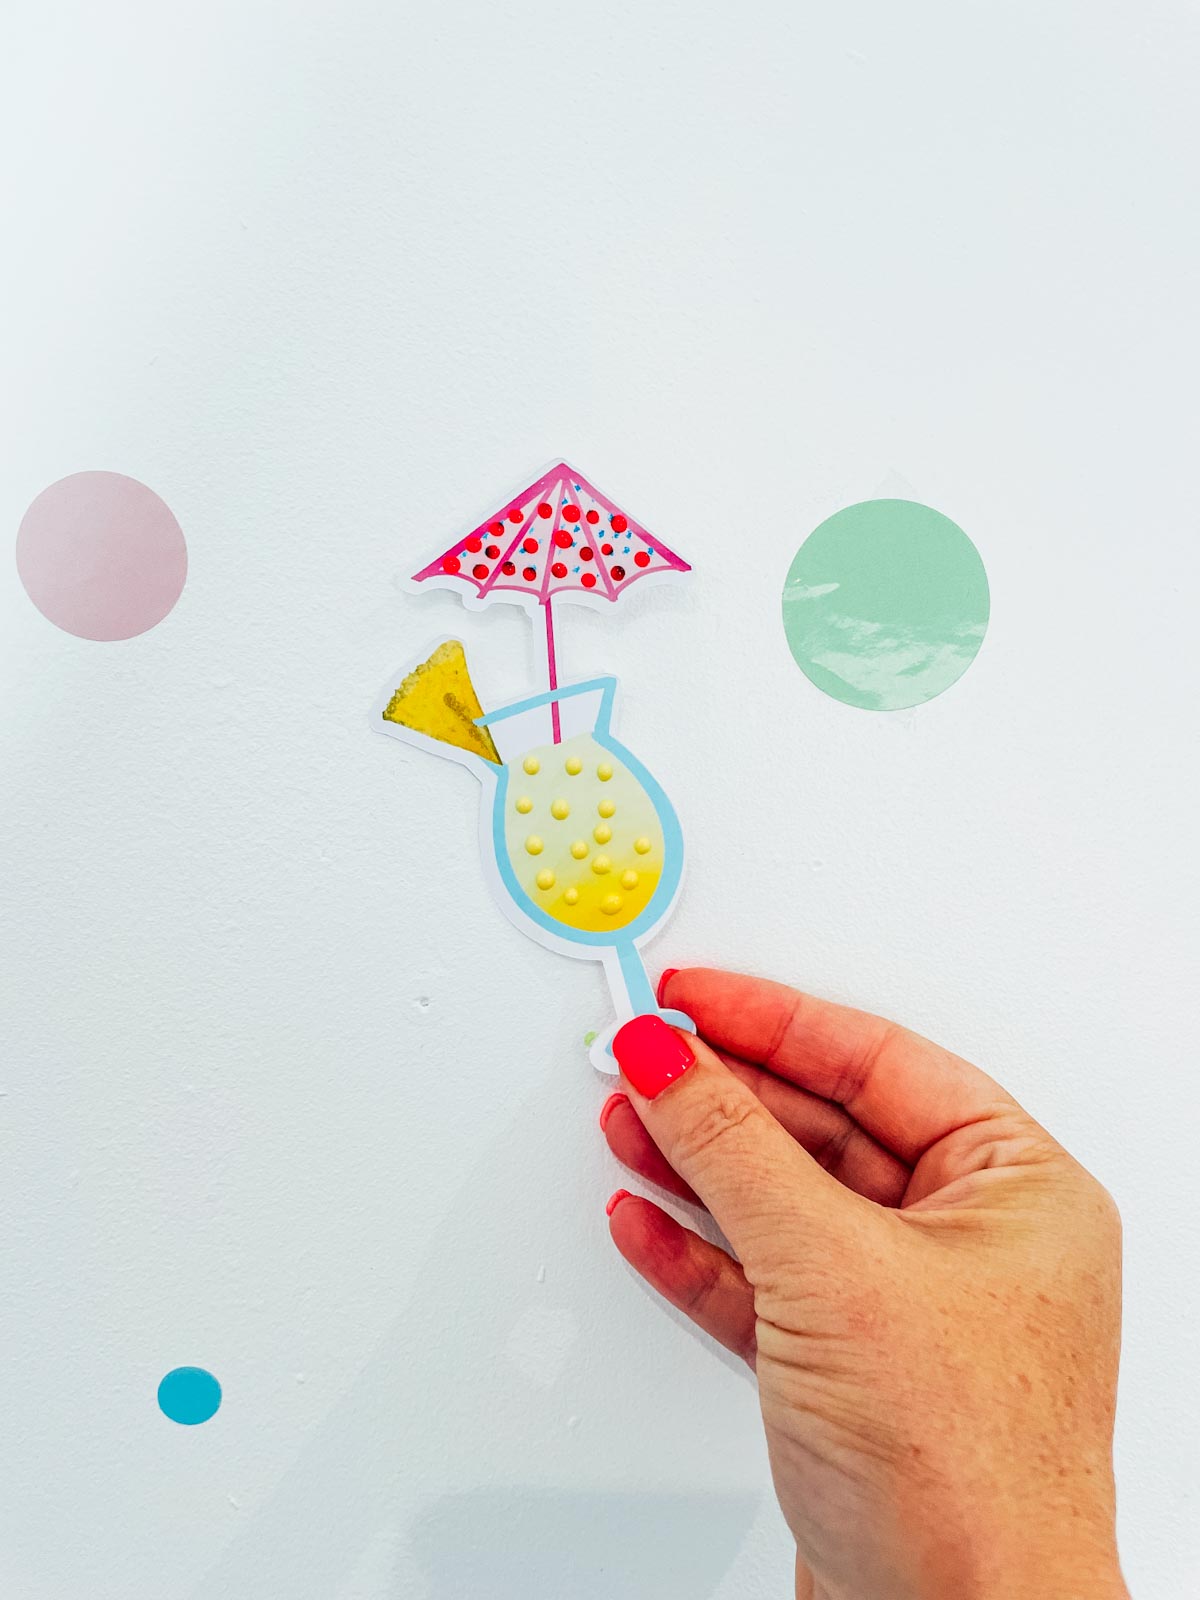 Free printable pina collada for printable stickers and cake toppers